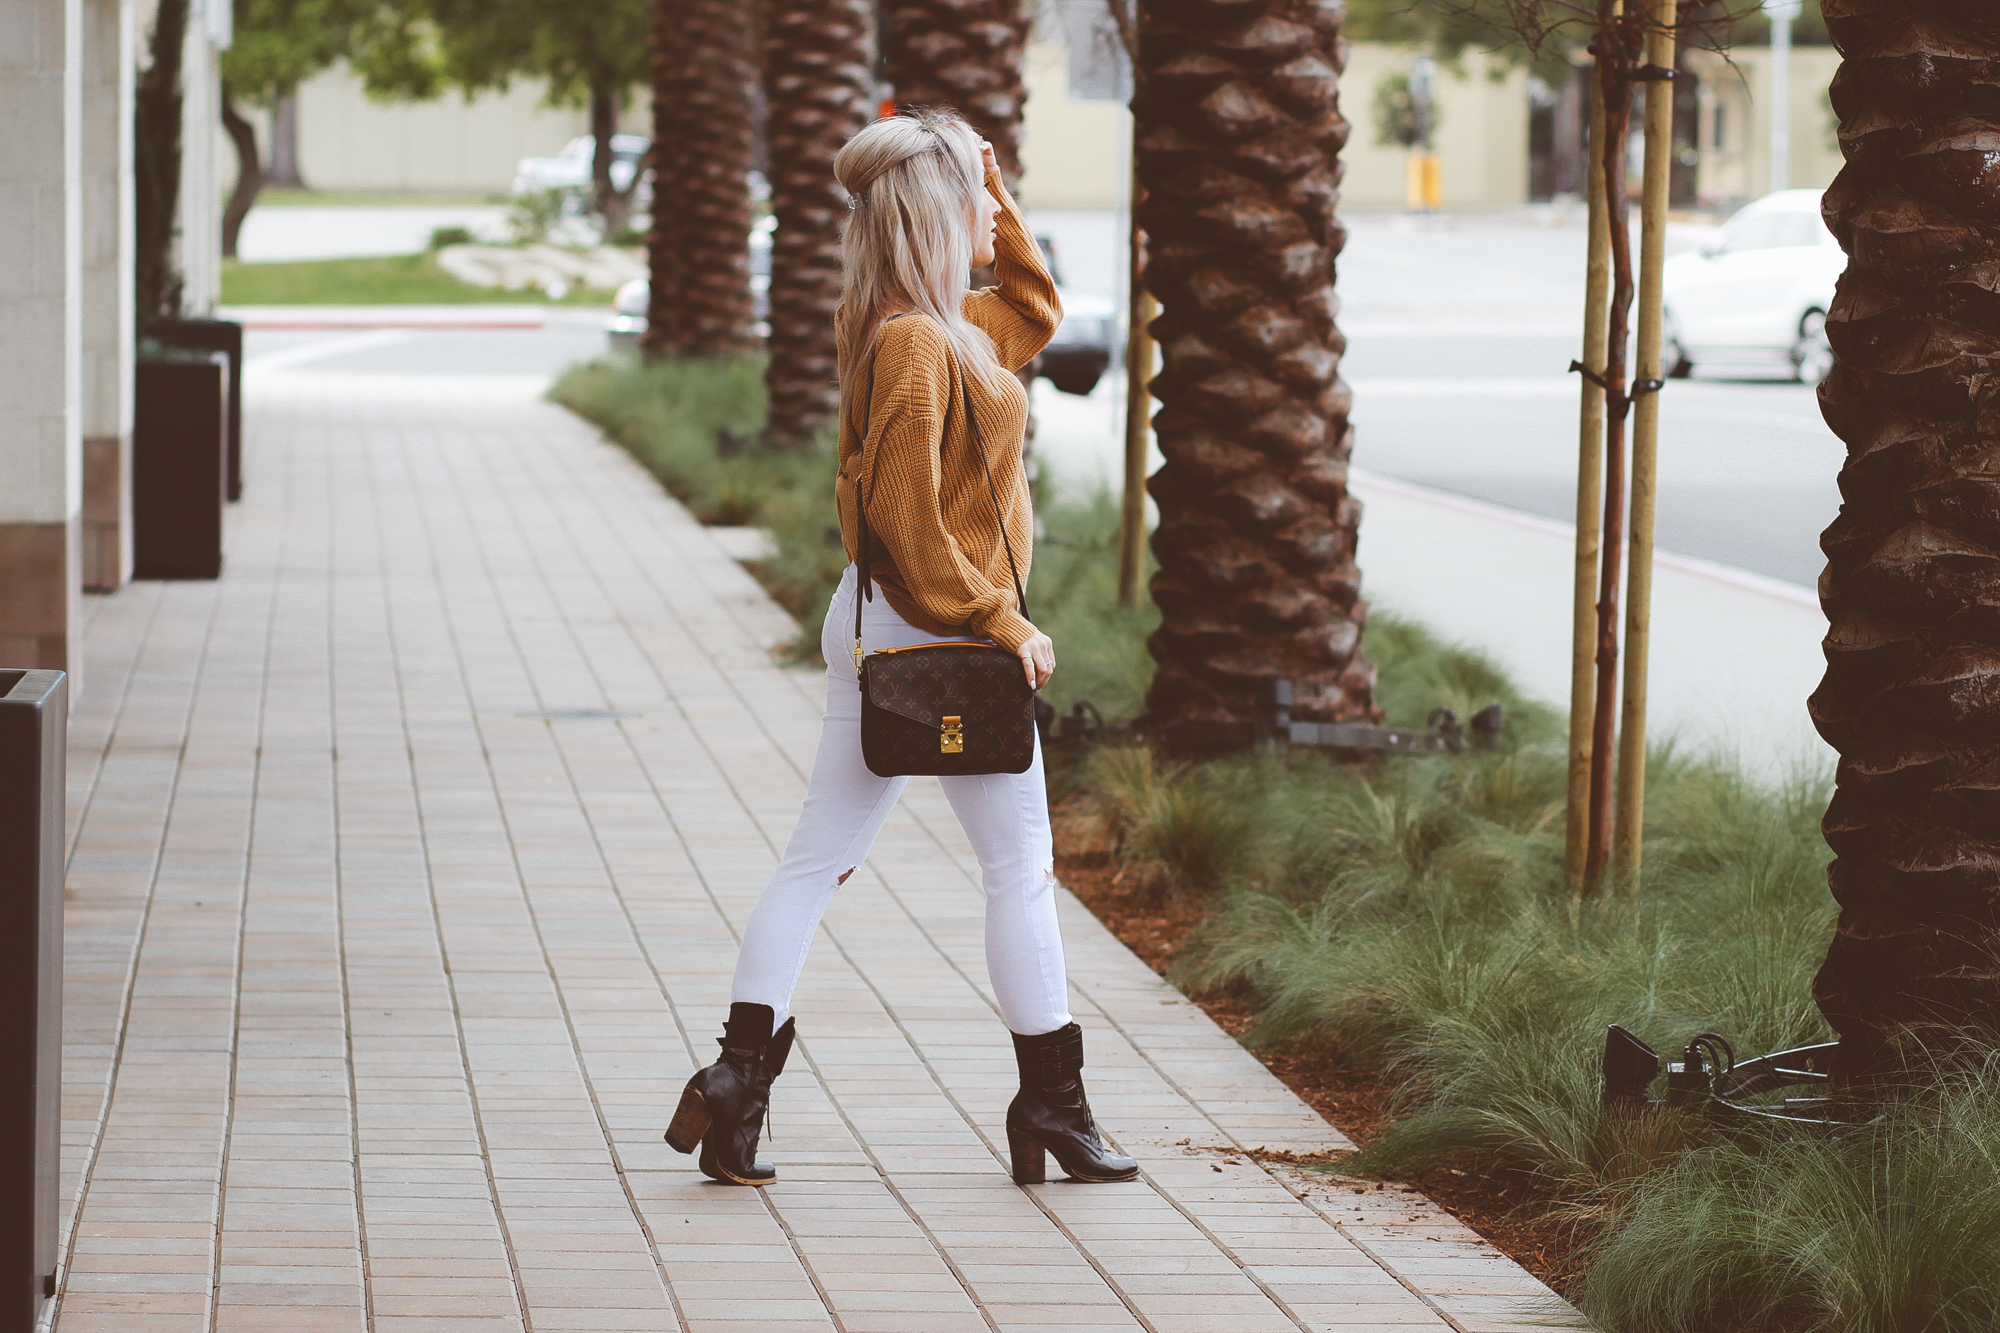 Blondie in the City | White Ripped Jeans by @tractrjeans | Brown Oversized Sweater | Louis Vuitton Pochette Metis